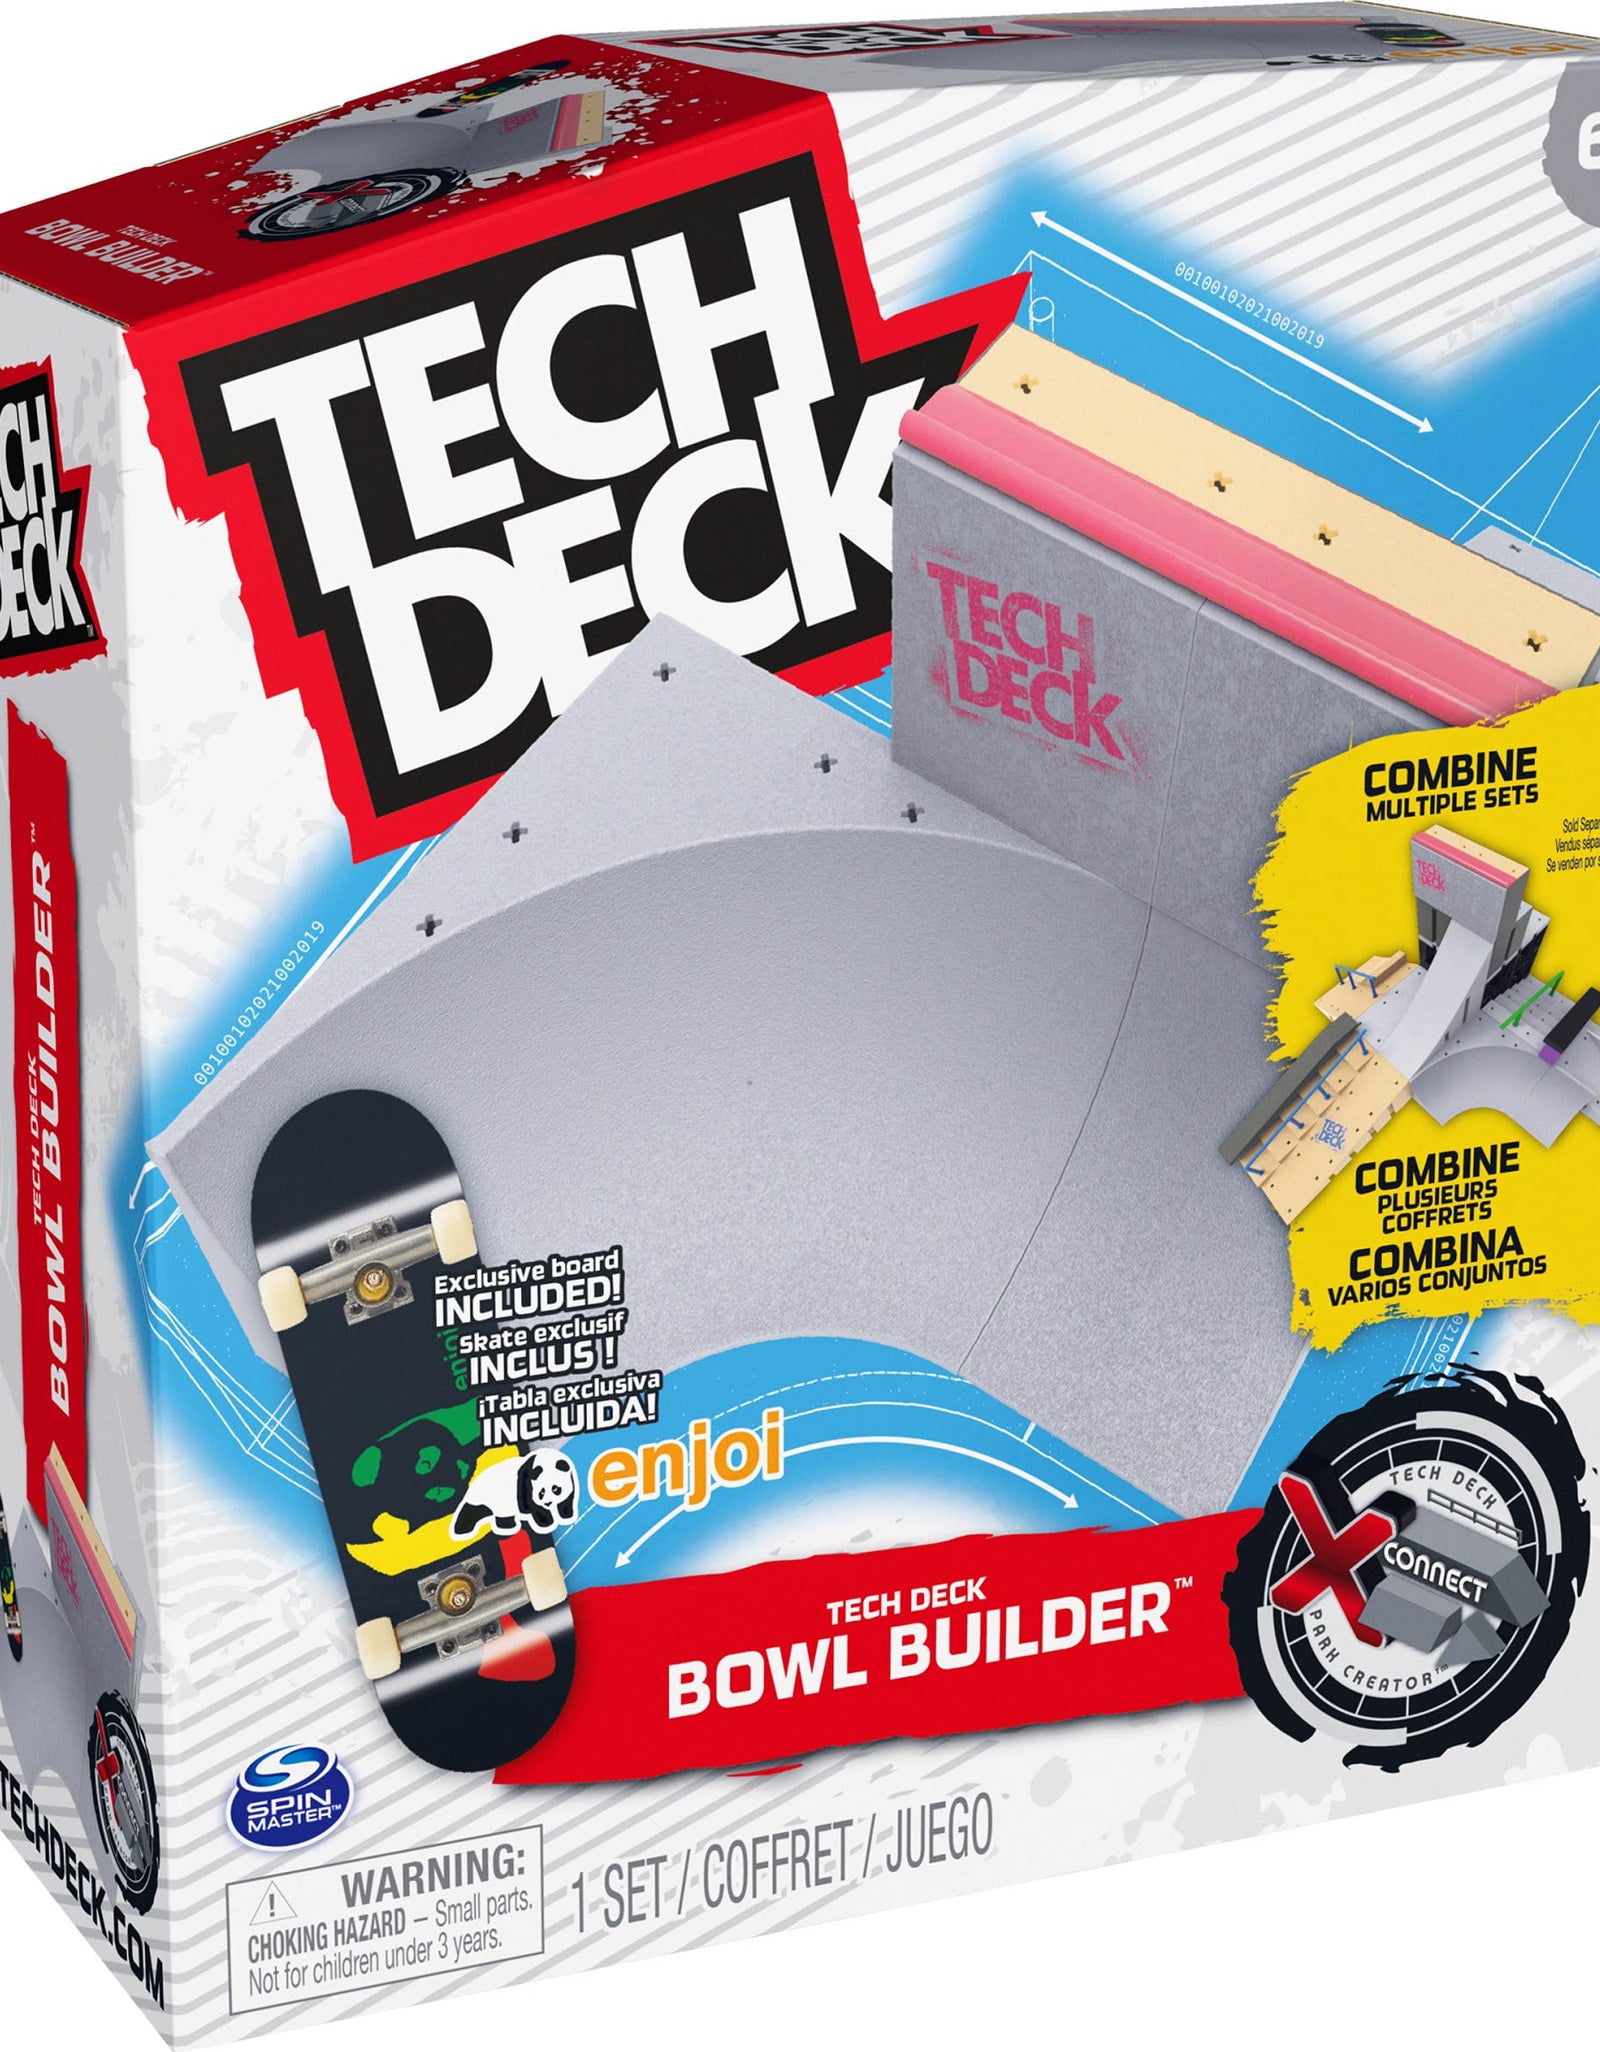 TECH DECK, Bowl Builder X-Connect Park Creator, Customizable and Buildable Ramp Set with Exclusive Fingerboard, Kids Toy for Ages 6 and up